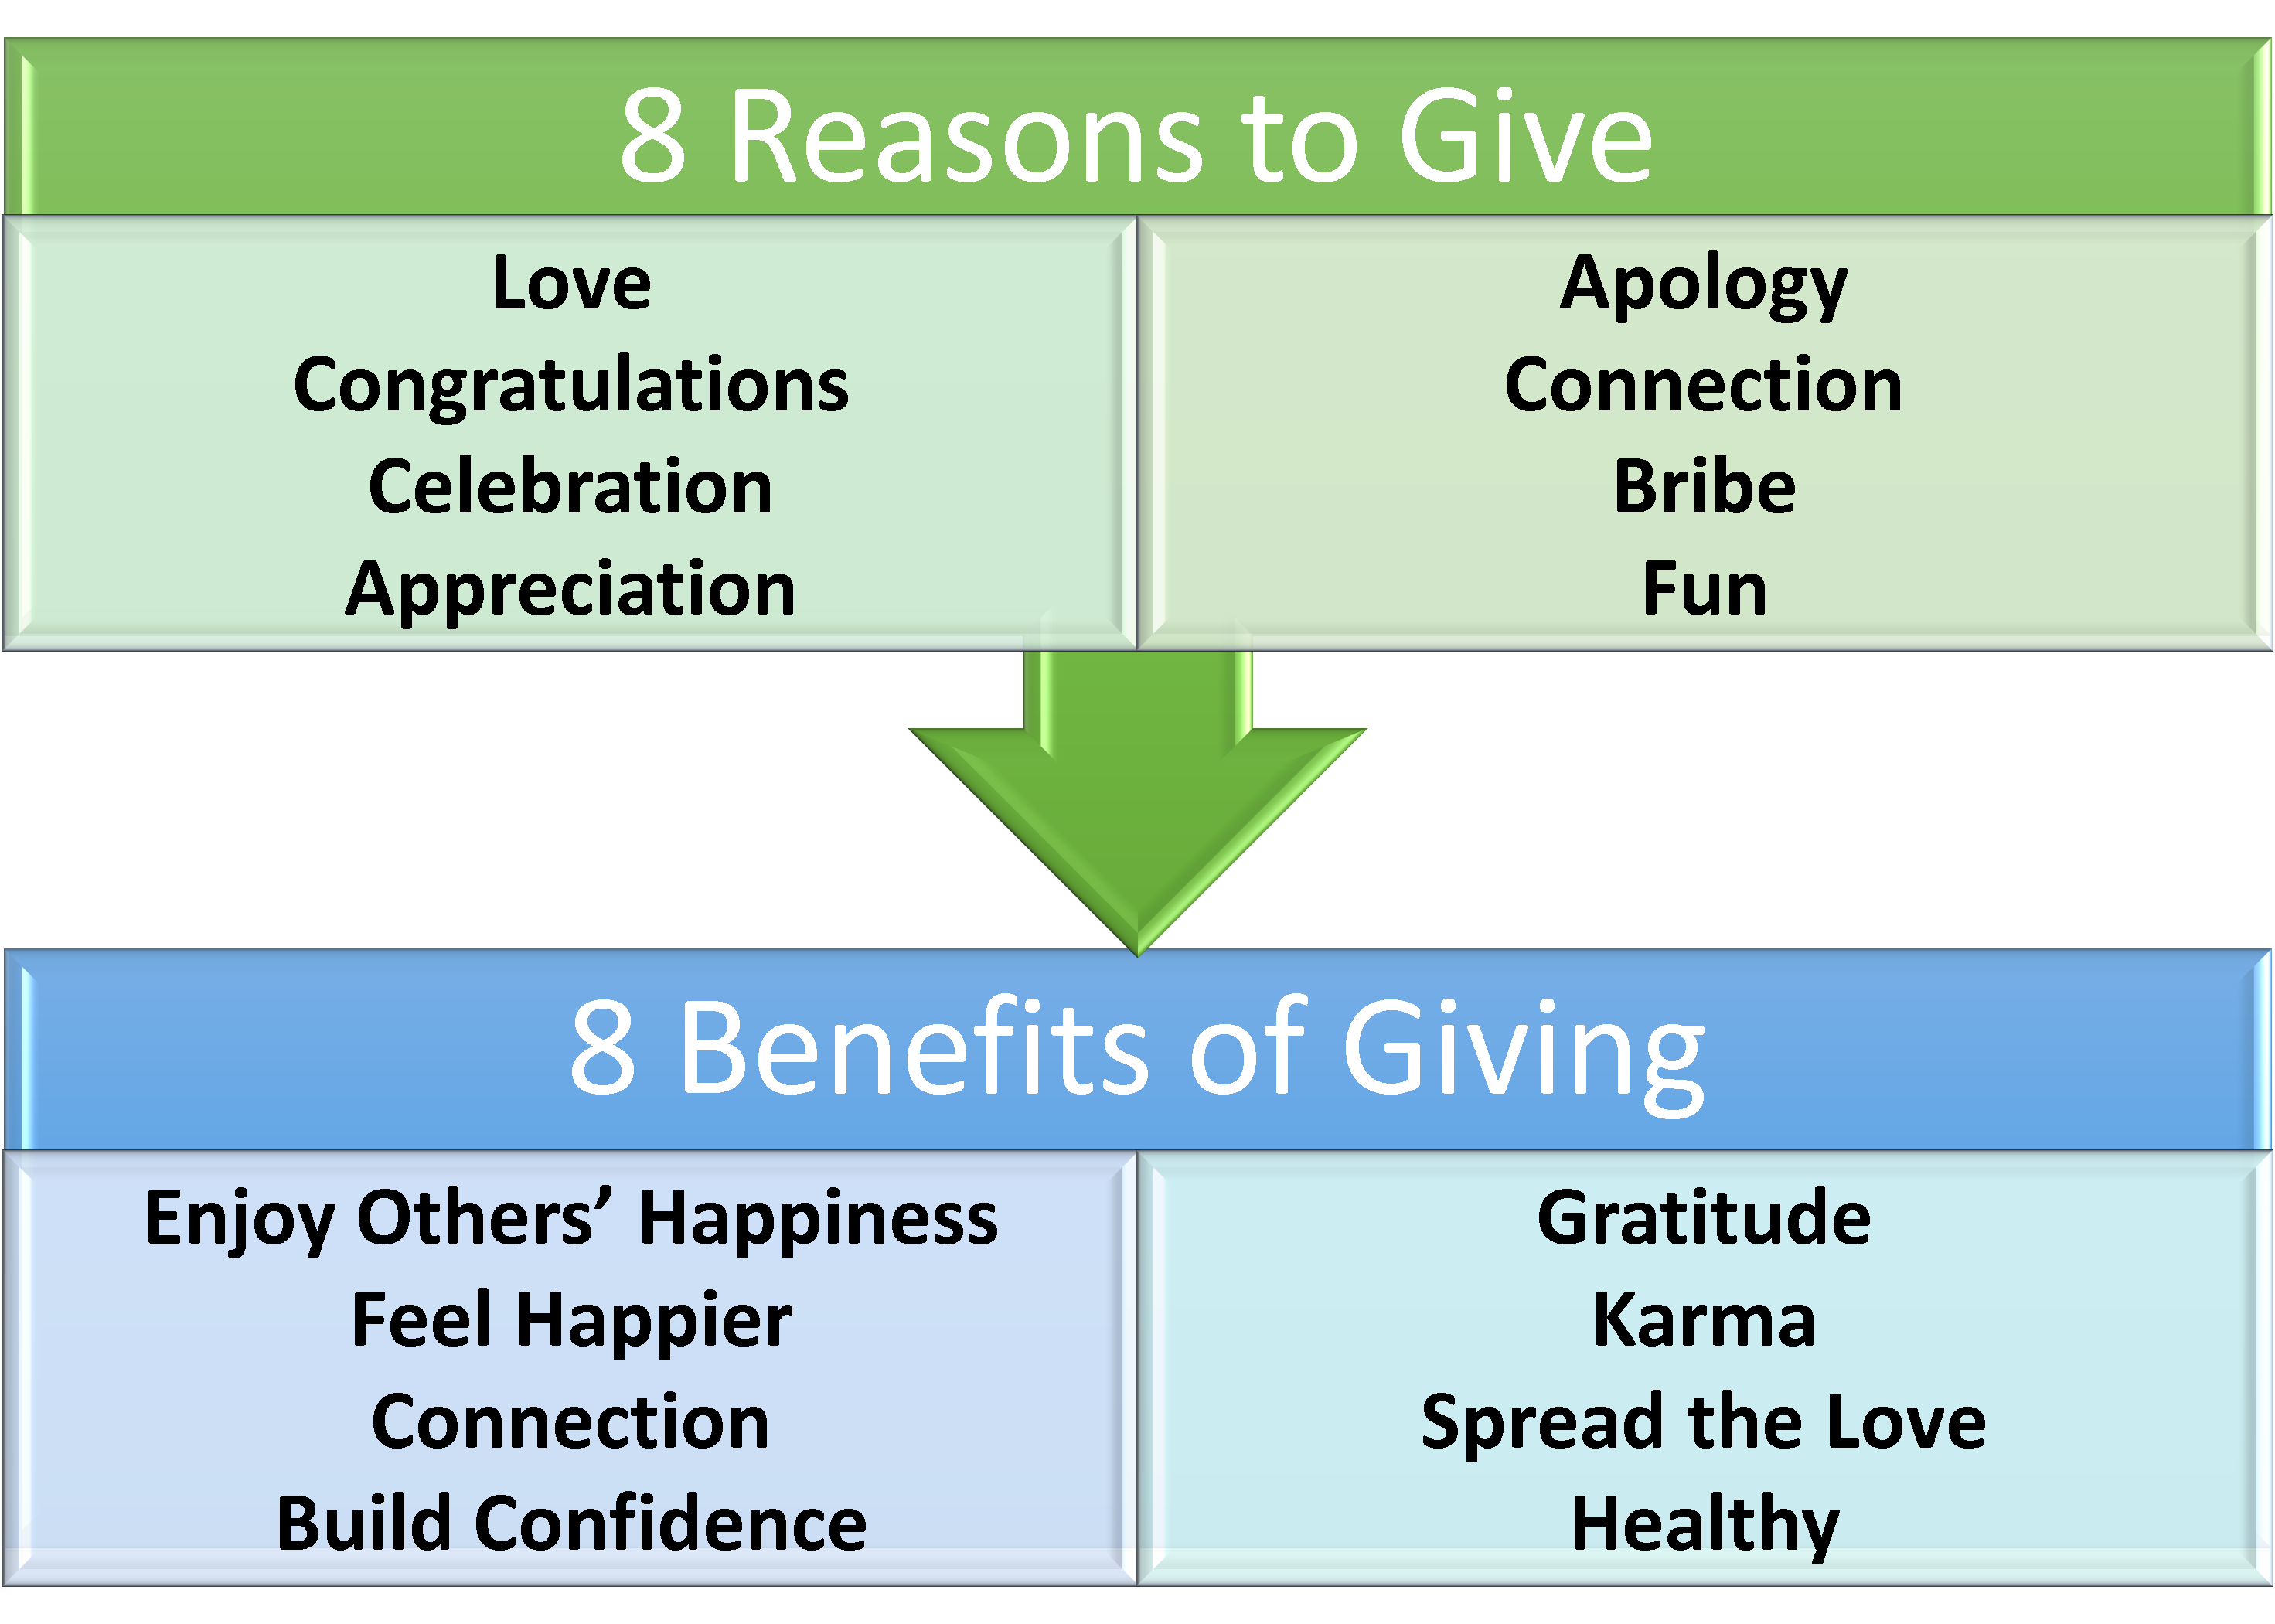 8 Reasons for and Benefits of Giving